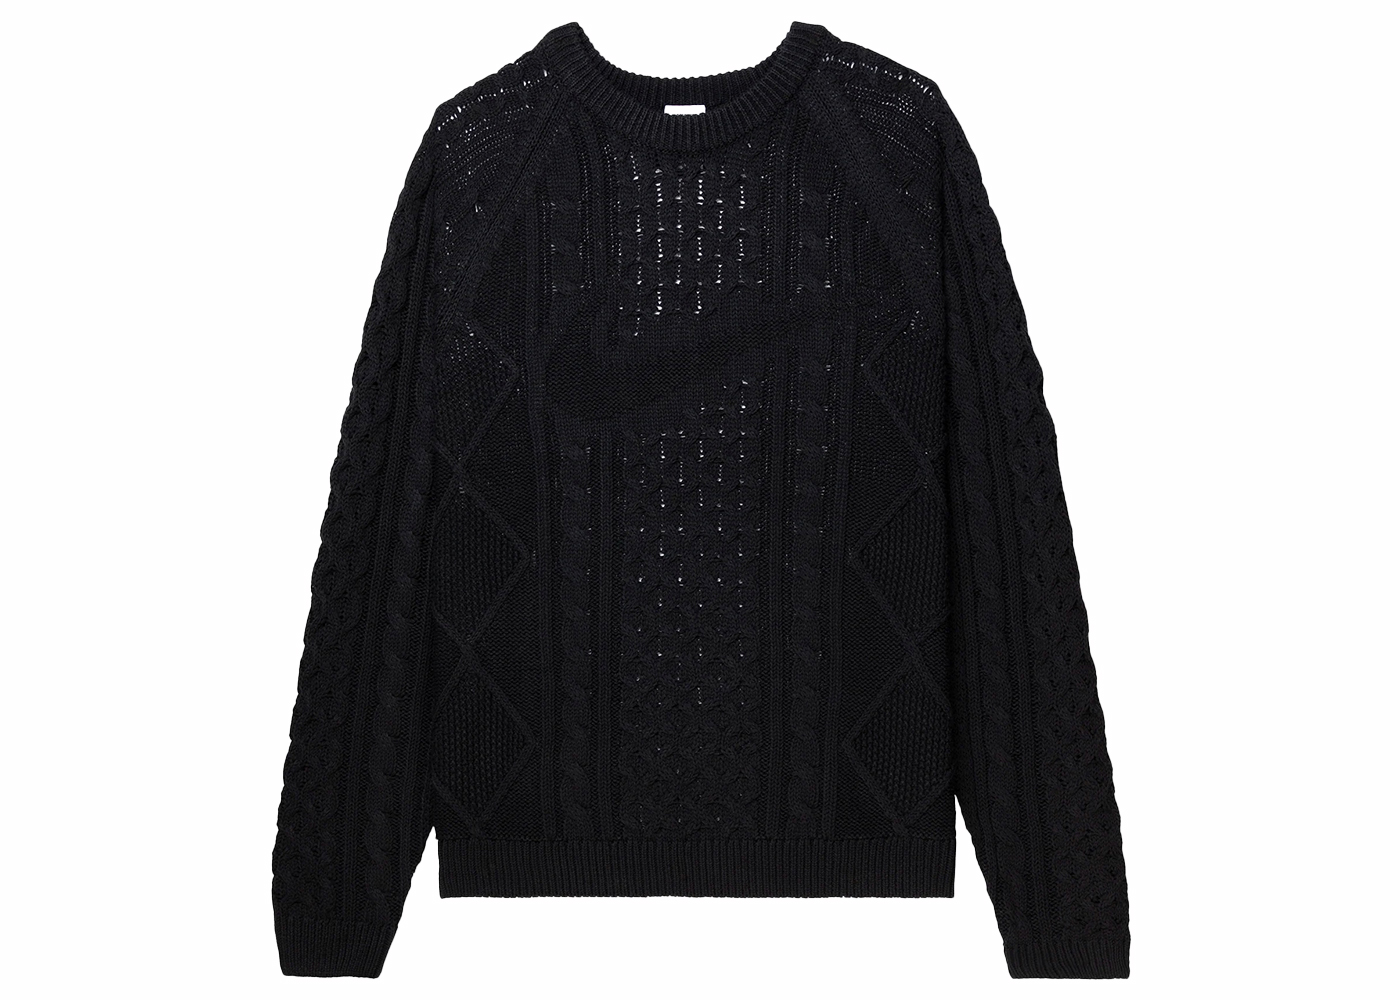 Nike Cable Knit L/S Sweater (US Sizing) Black